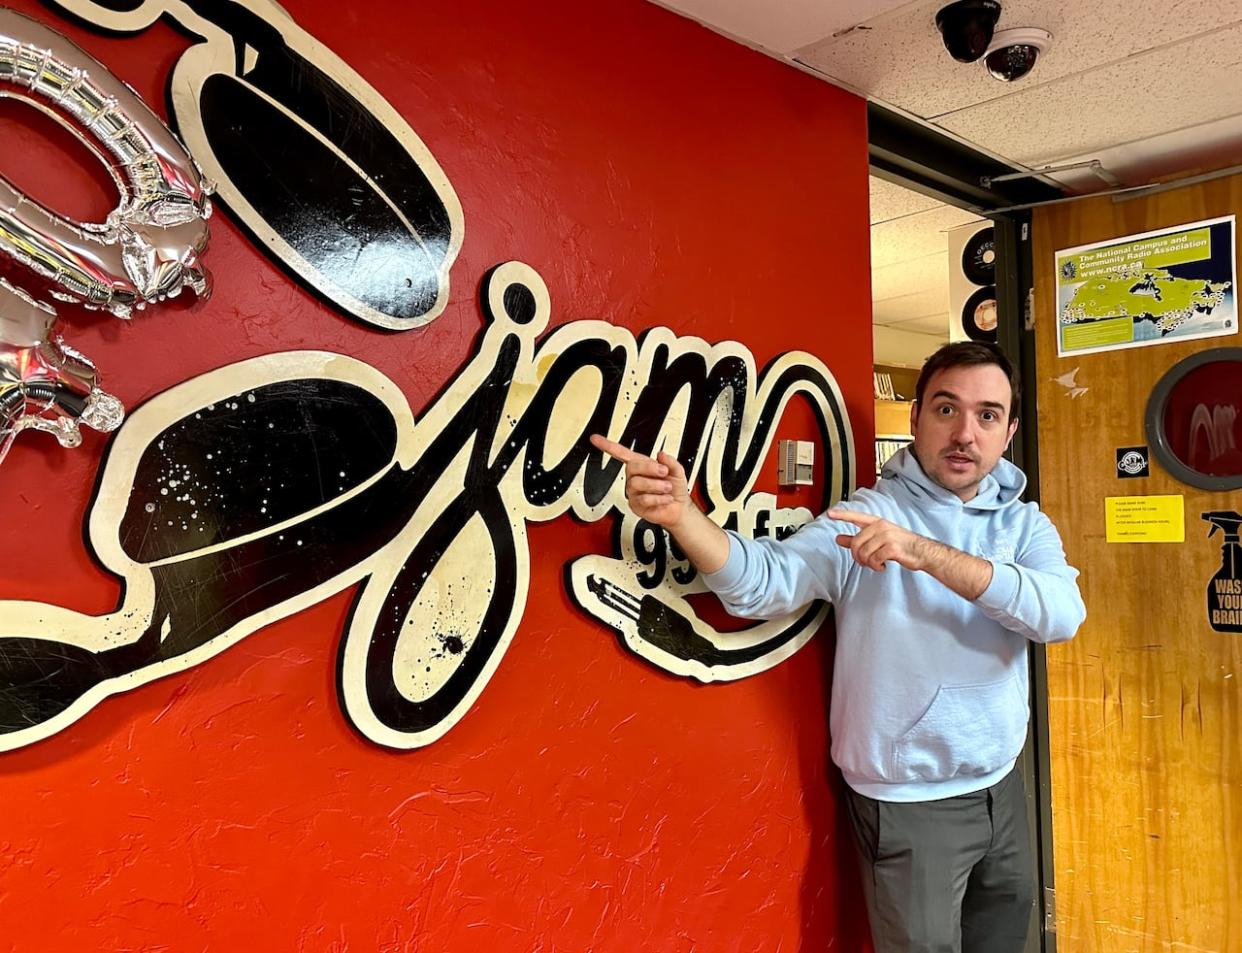 Walter Petrichyn, station manager of CJAM 99.1 FM, gestures at a mural in the station's offices at the University of Windsor student centre. (Dalson Chen/CBC - image credit)